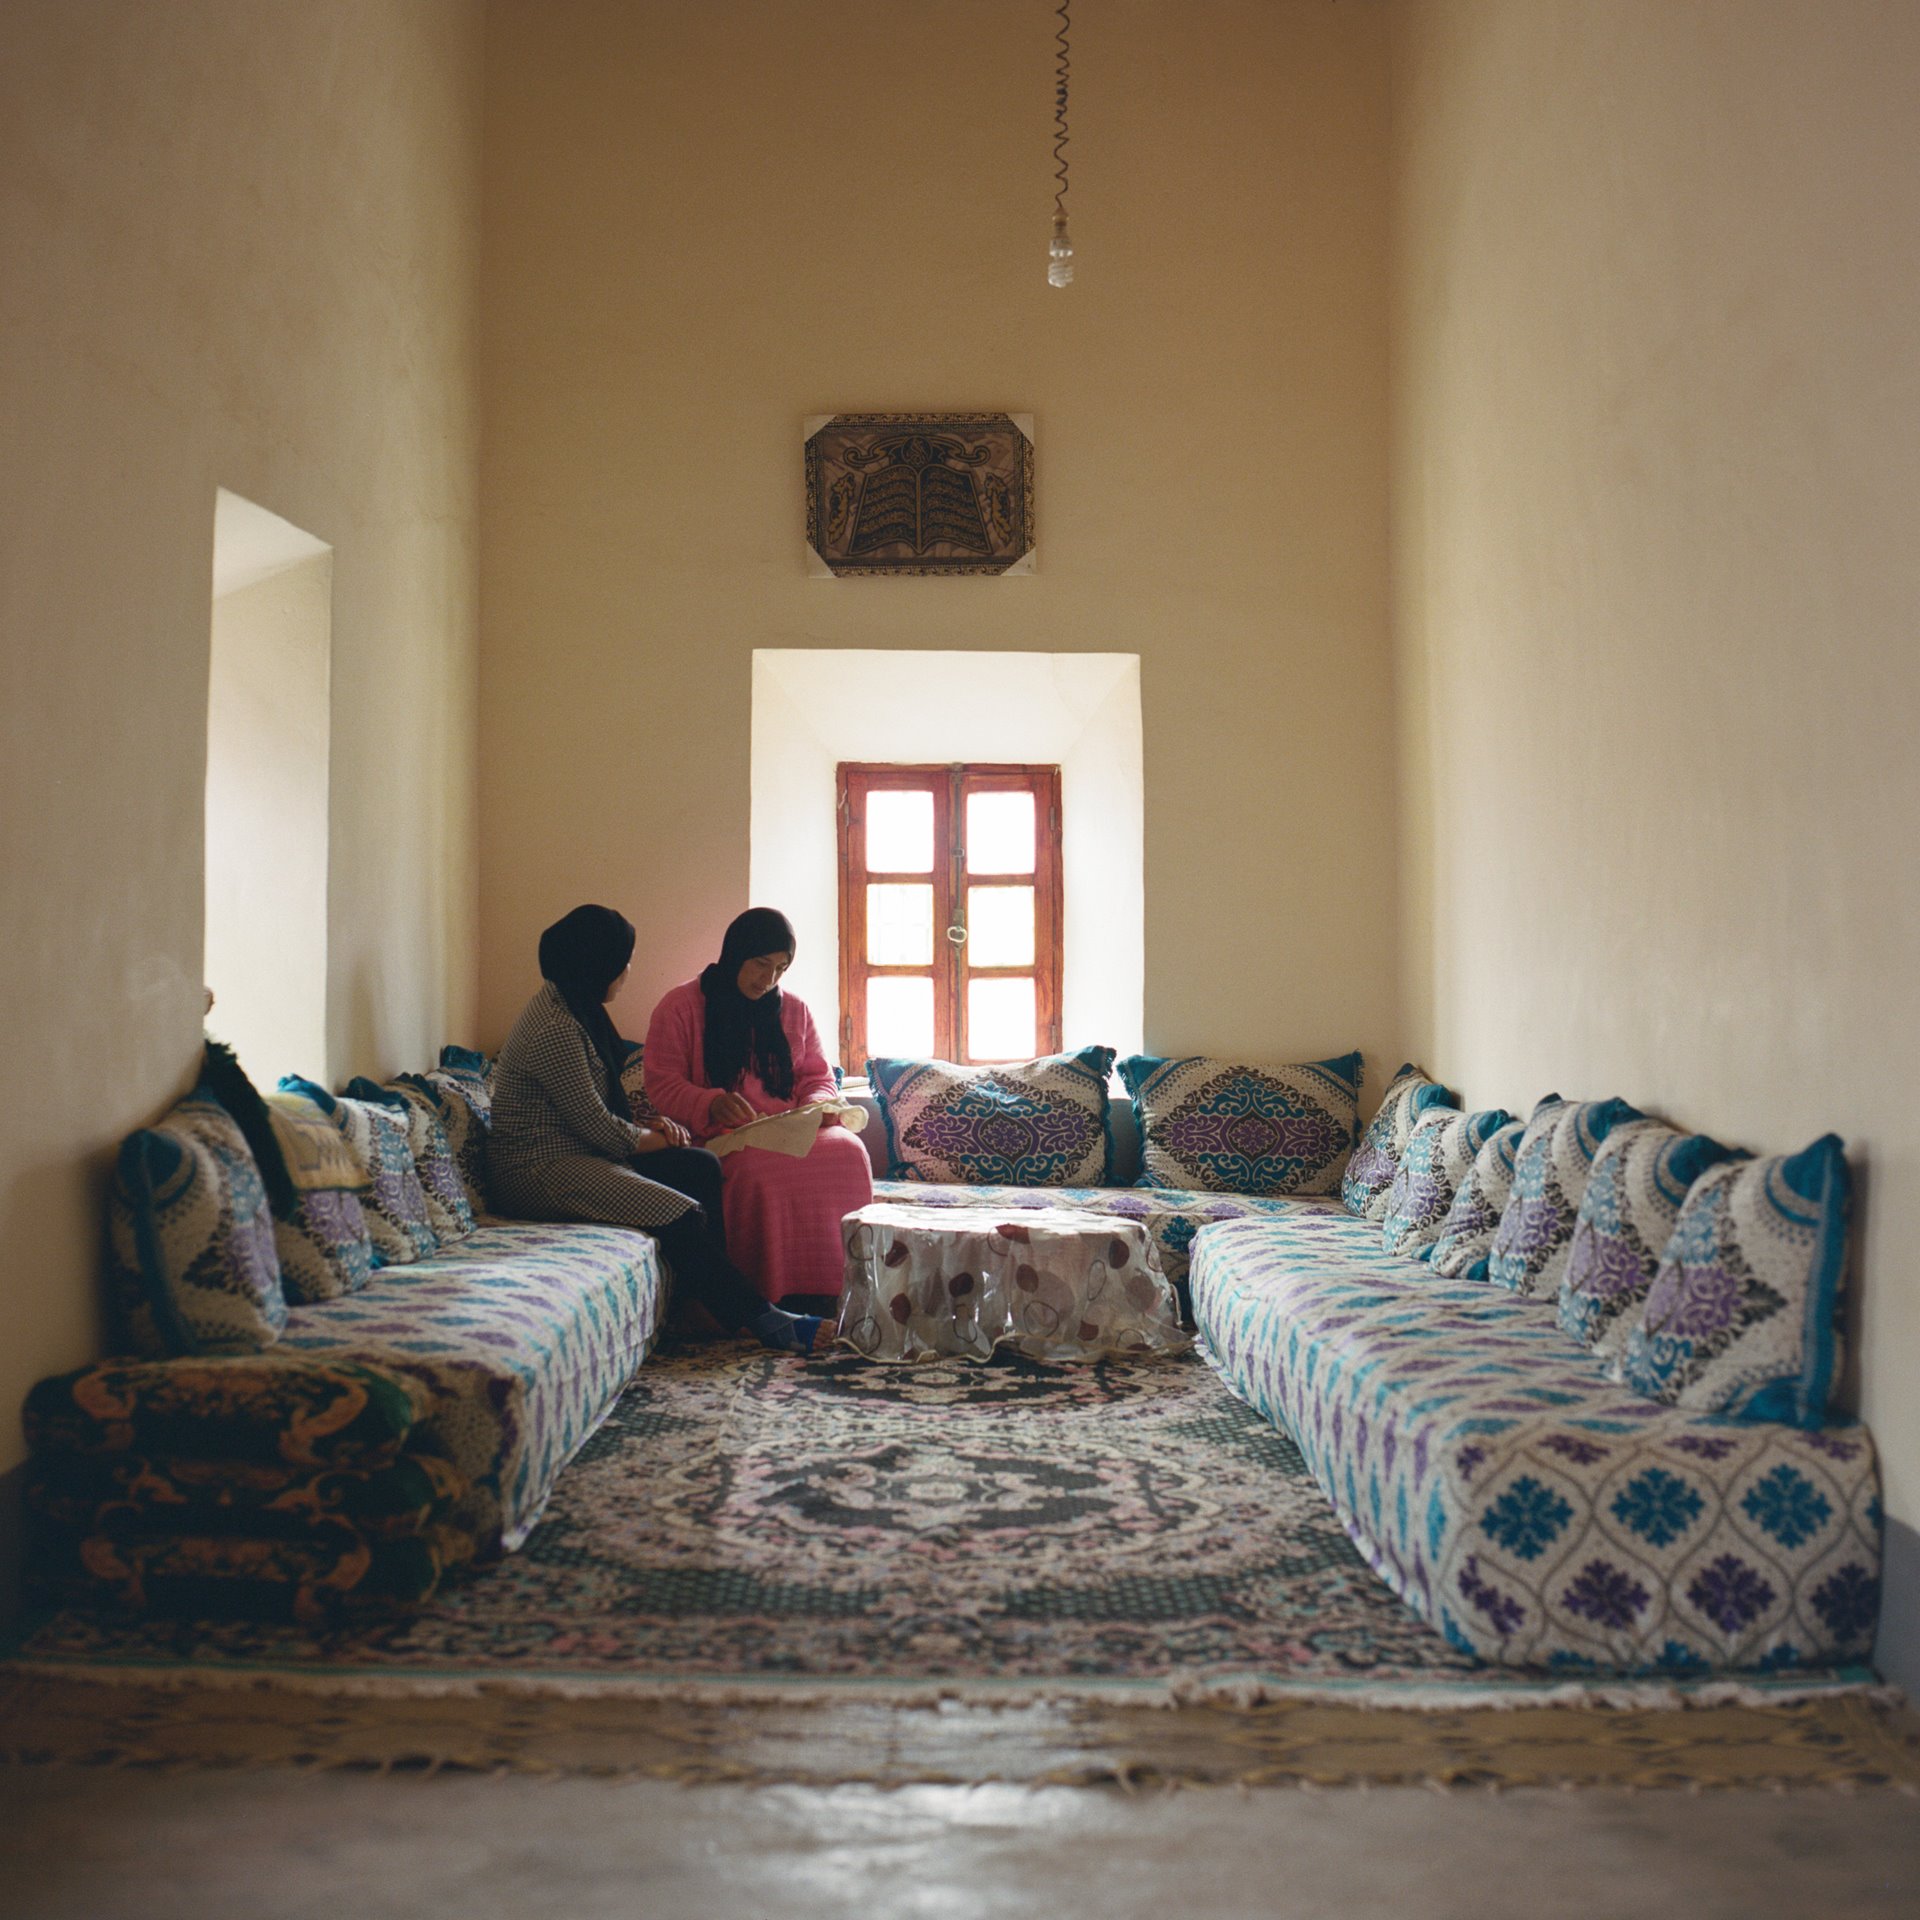 Zakia Erroukna (39) and Hayat El Yamani (34) discuss embroidery techniques in Zakia&rsquo;s living-room, at Skoura Oasis, in central Morocco. Some 20,000 people live among nearly 140,000 palm trees at the oasis. Most live from the produce they grow, and from date palms.